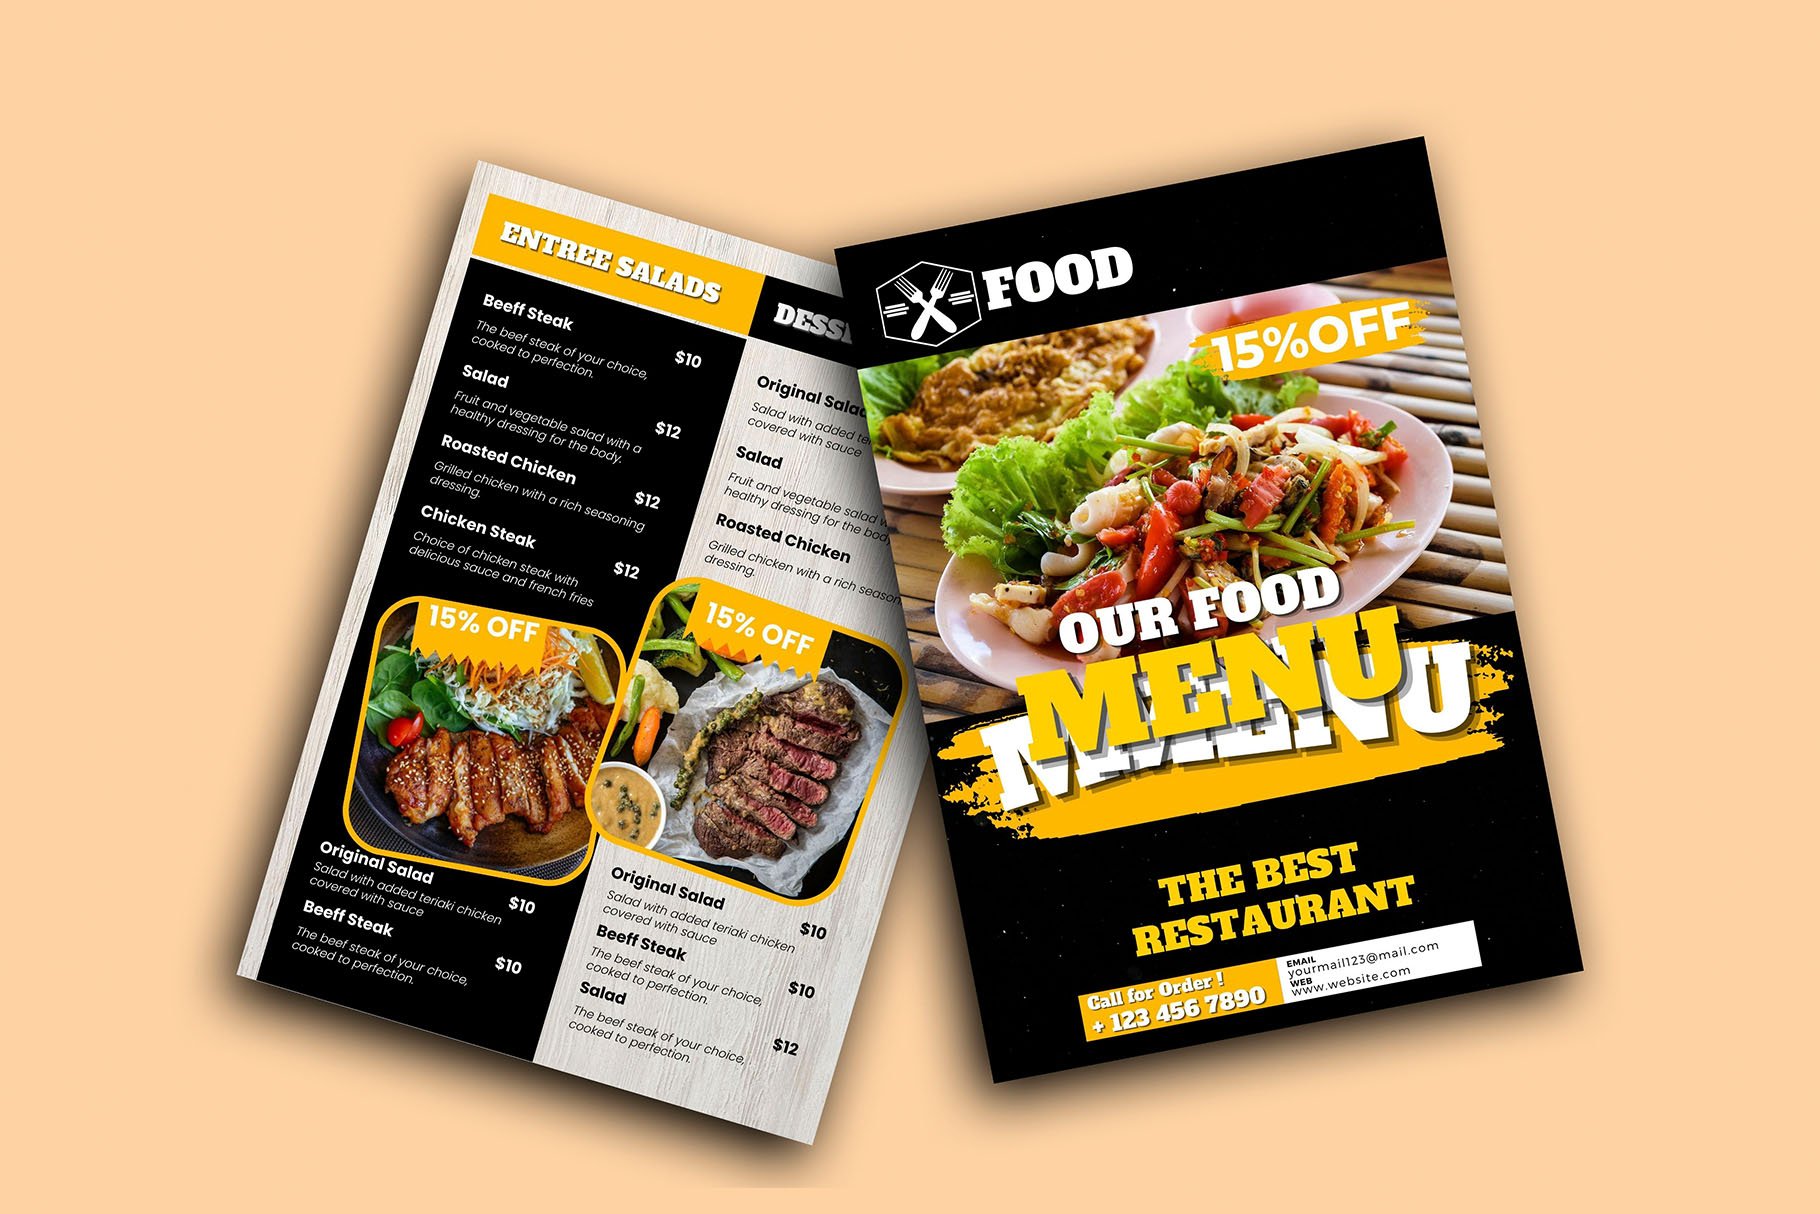 Fast Food Menu Free Poster Template for Photoshop and Illustrator!